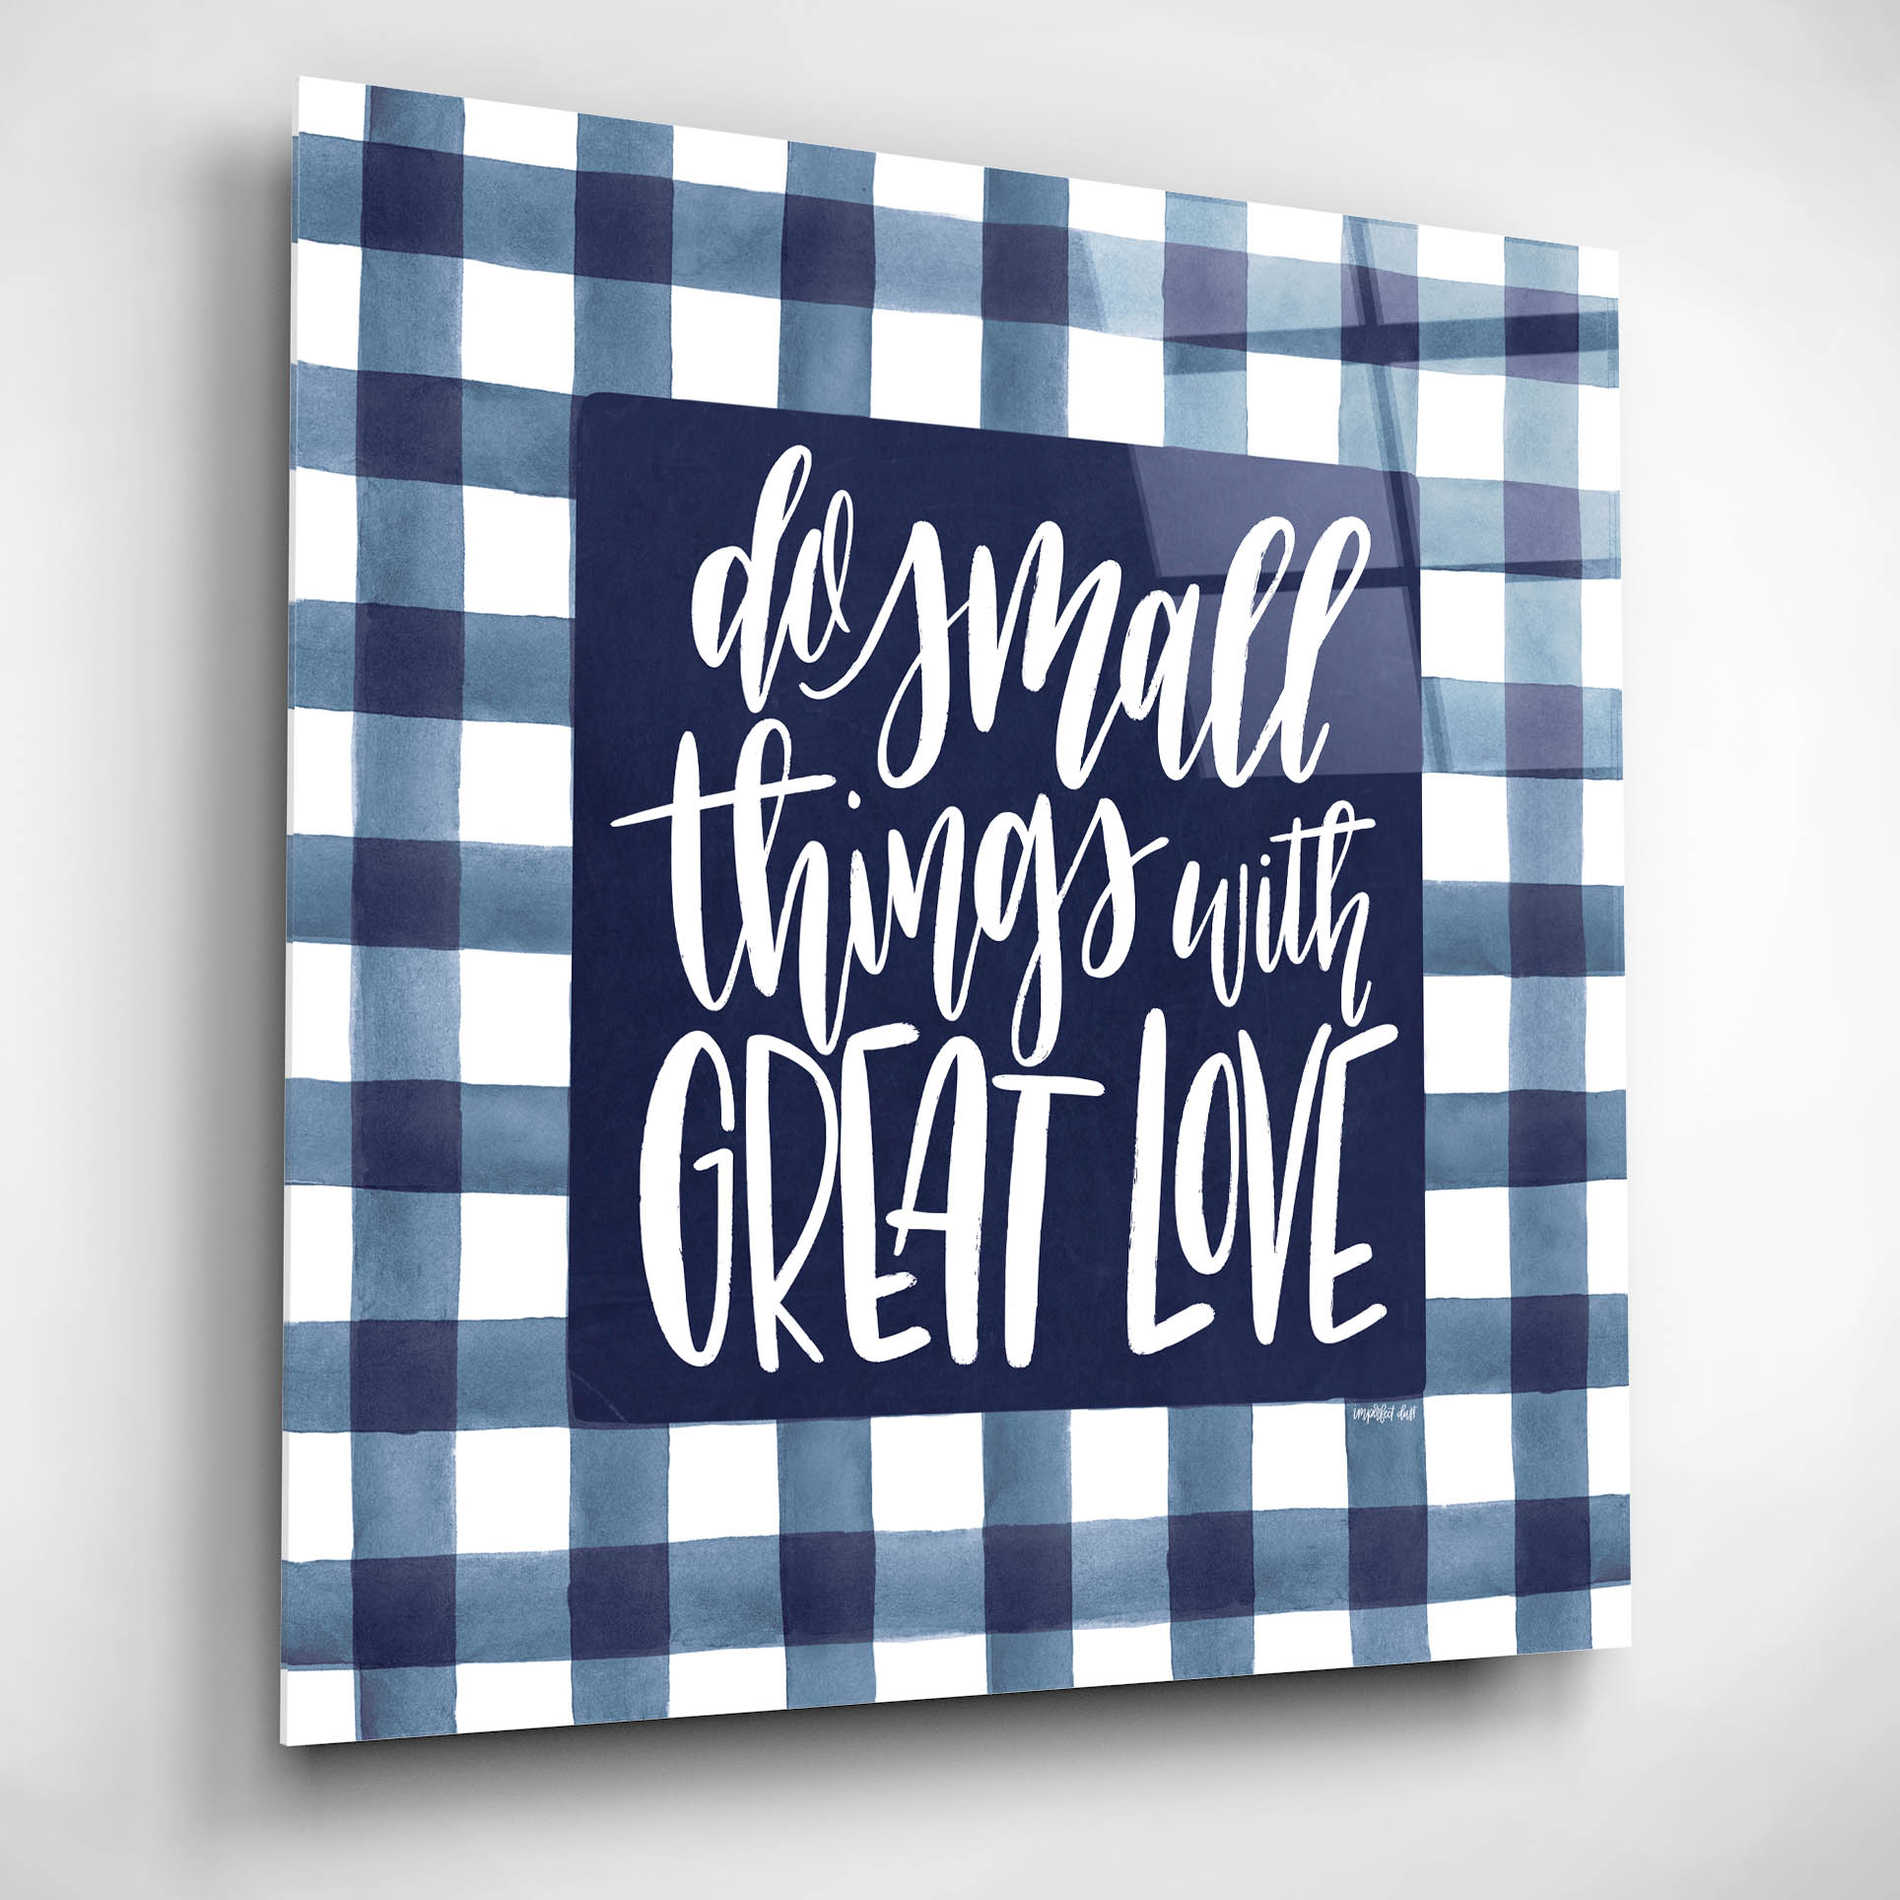 Epic Art 'Do Small Things with Great Love' by Imperfect Dust, Acrylic Glass Wall Art,12x12